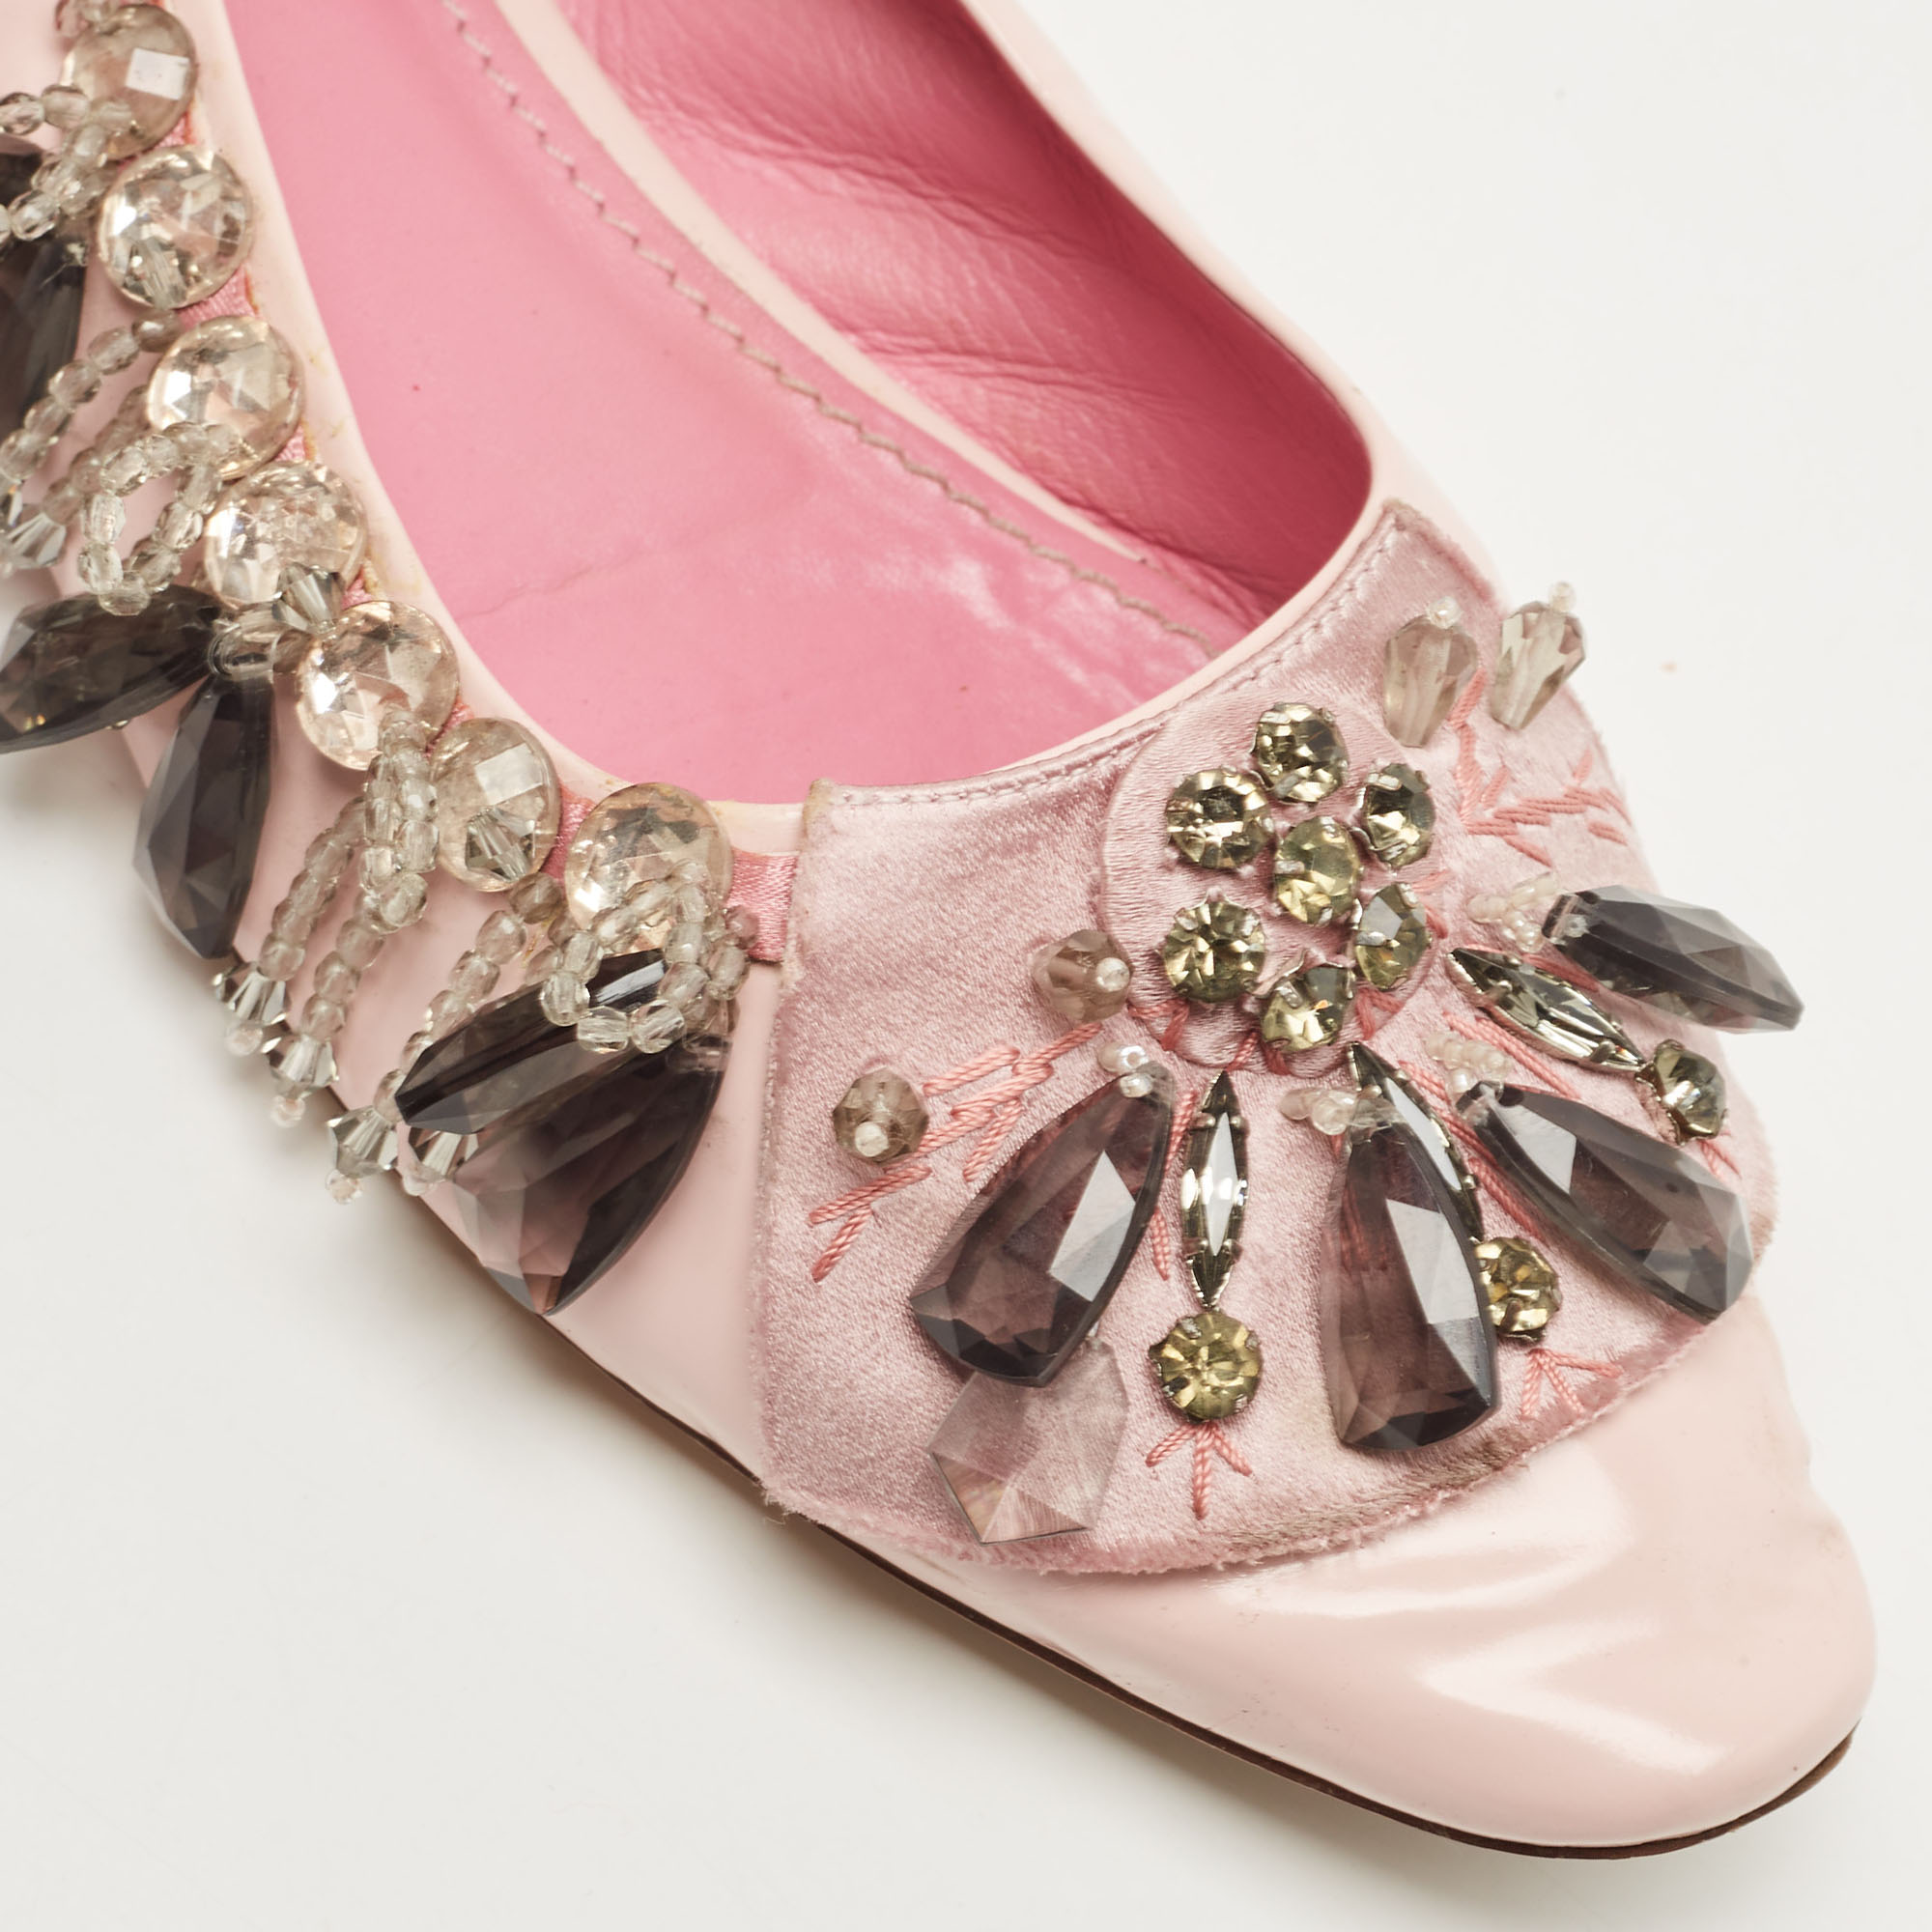 Louis Vuitton Pink Leather Embellished Ballet Flats Size 39.5